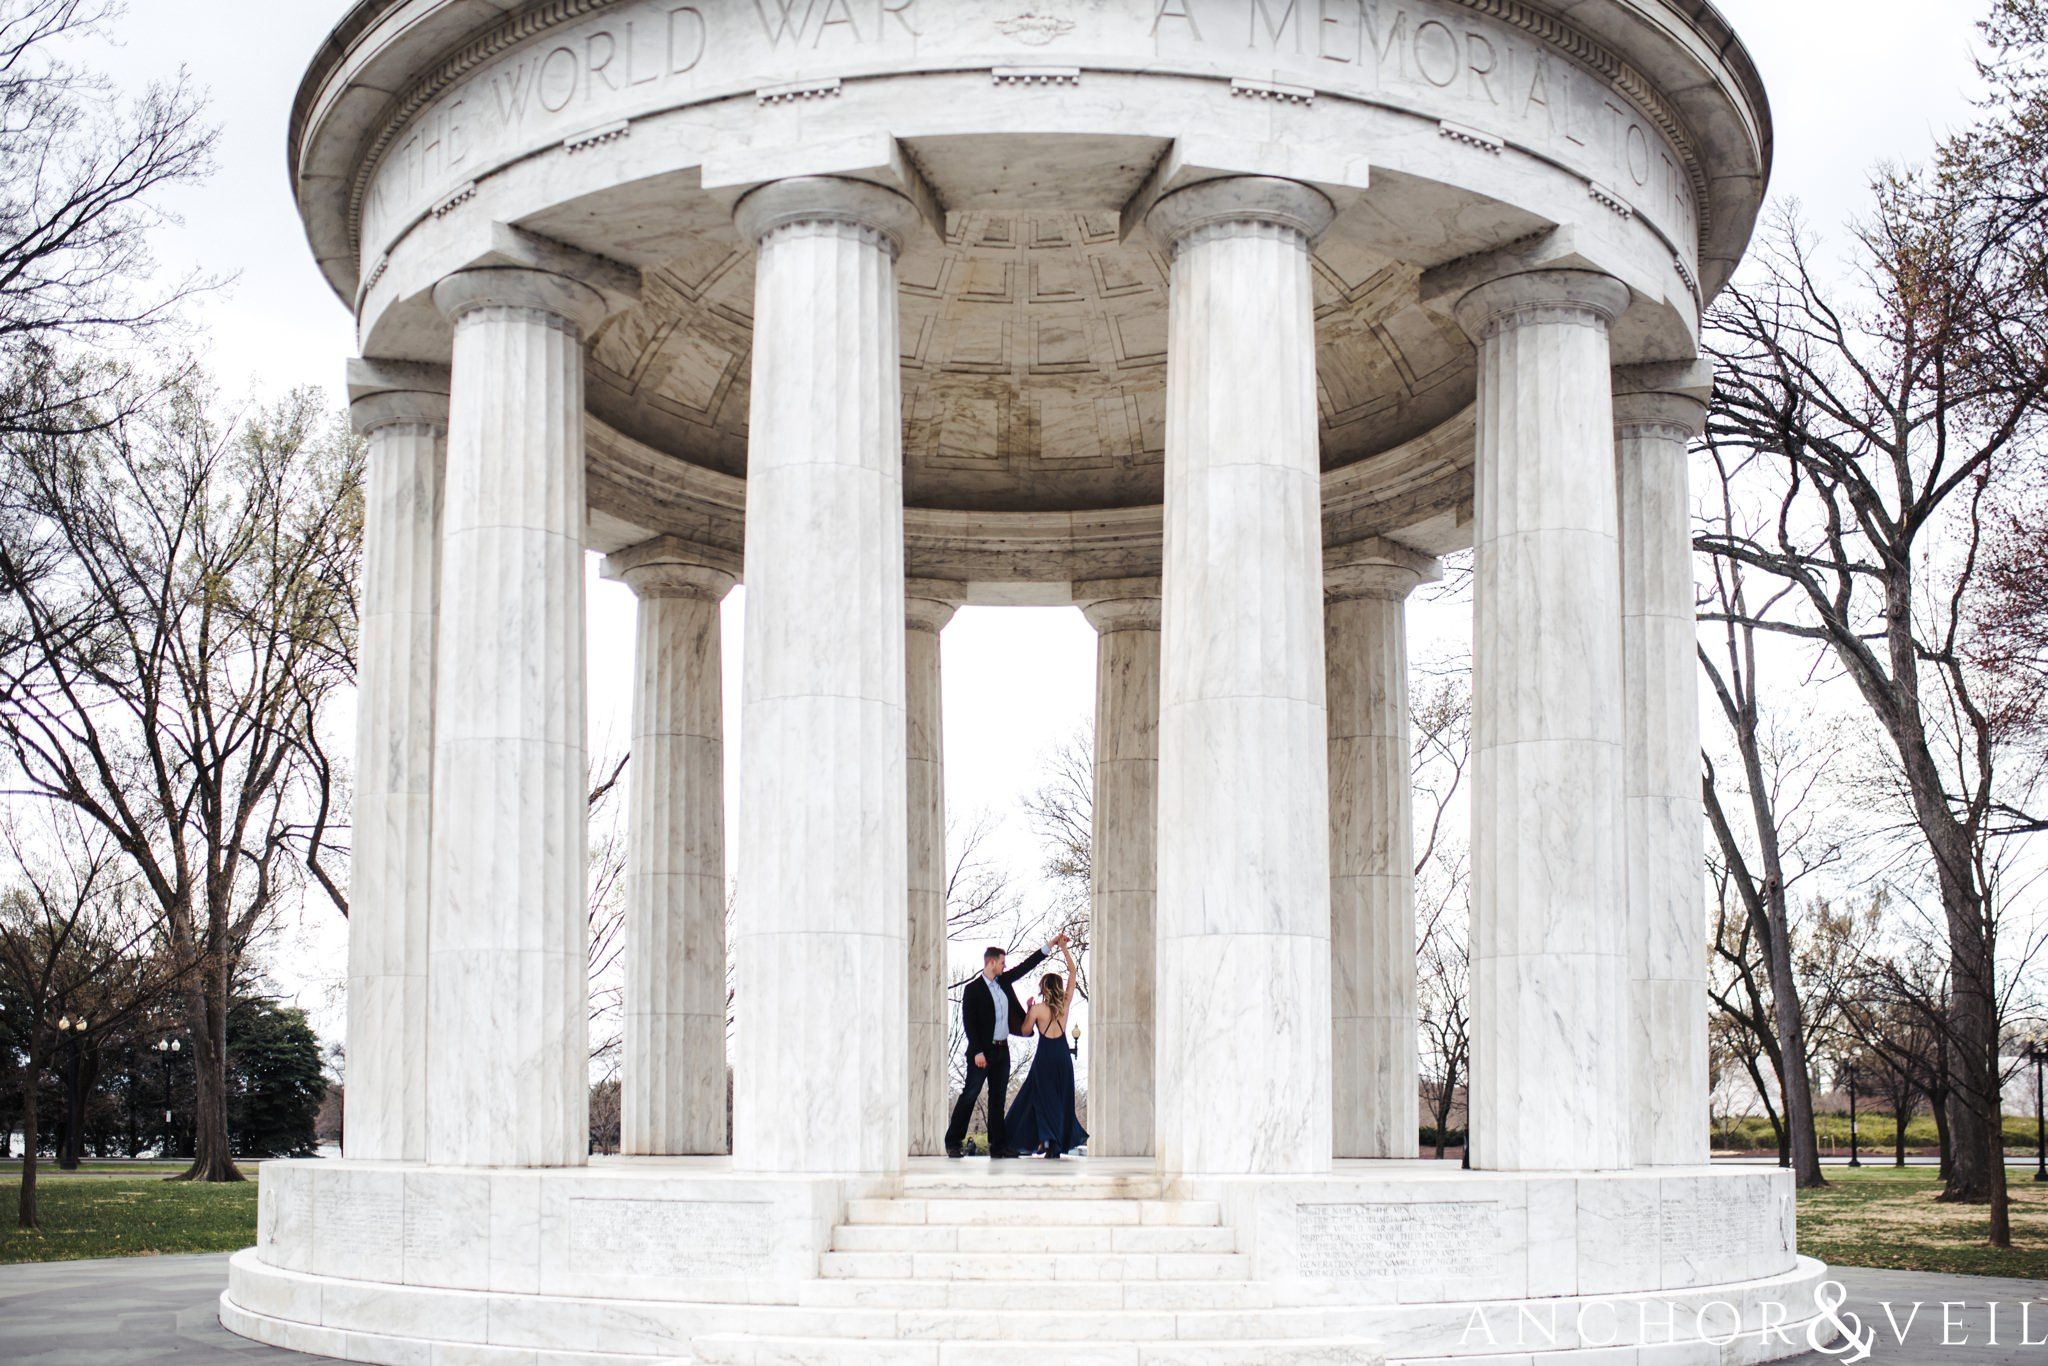 spinning her at the war memorial during their Scenic Washington DC Engagement Session